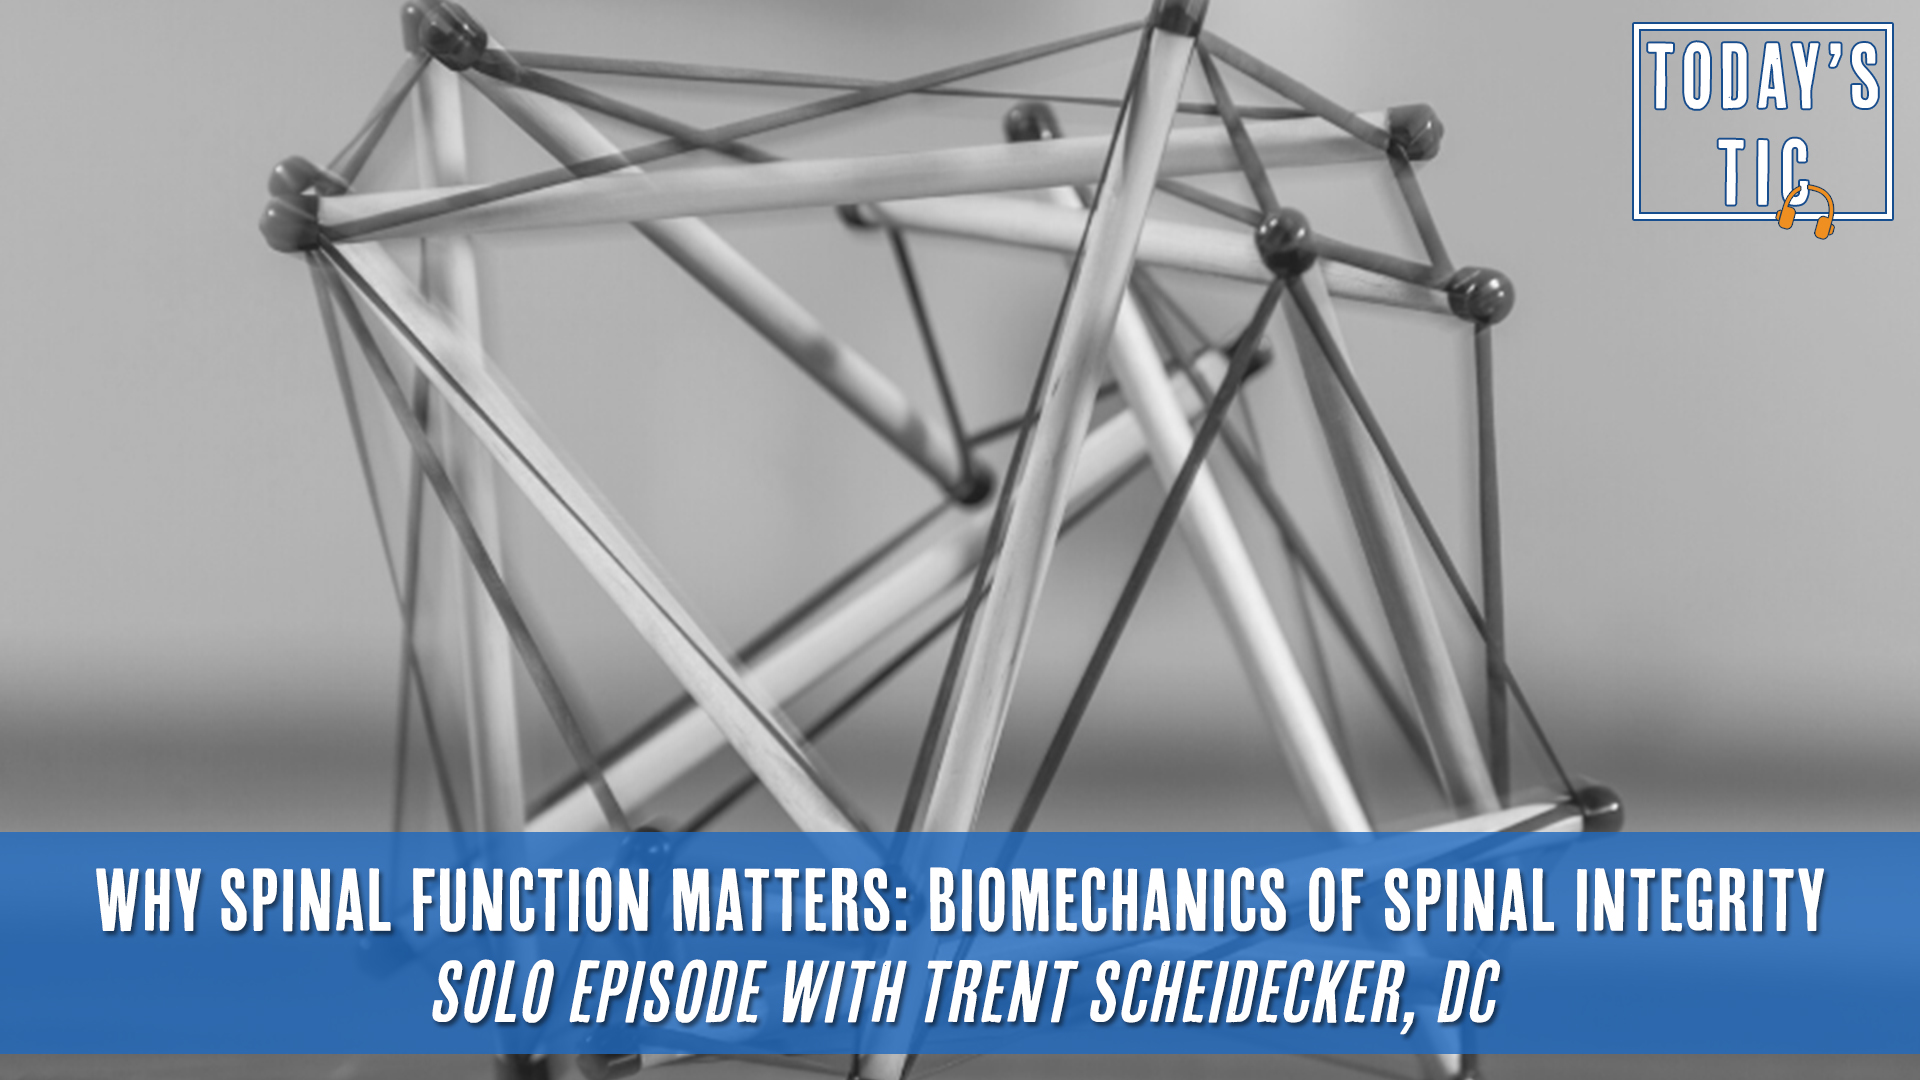 Why Spinal Function Matters: Biomechanics of Spinal Integrity